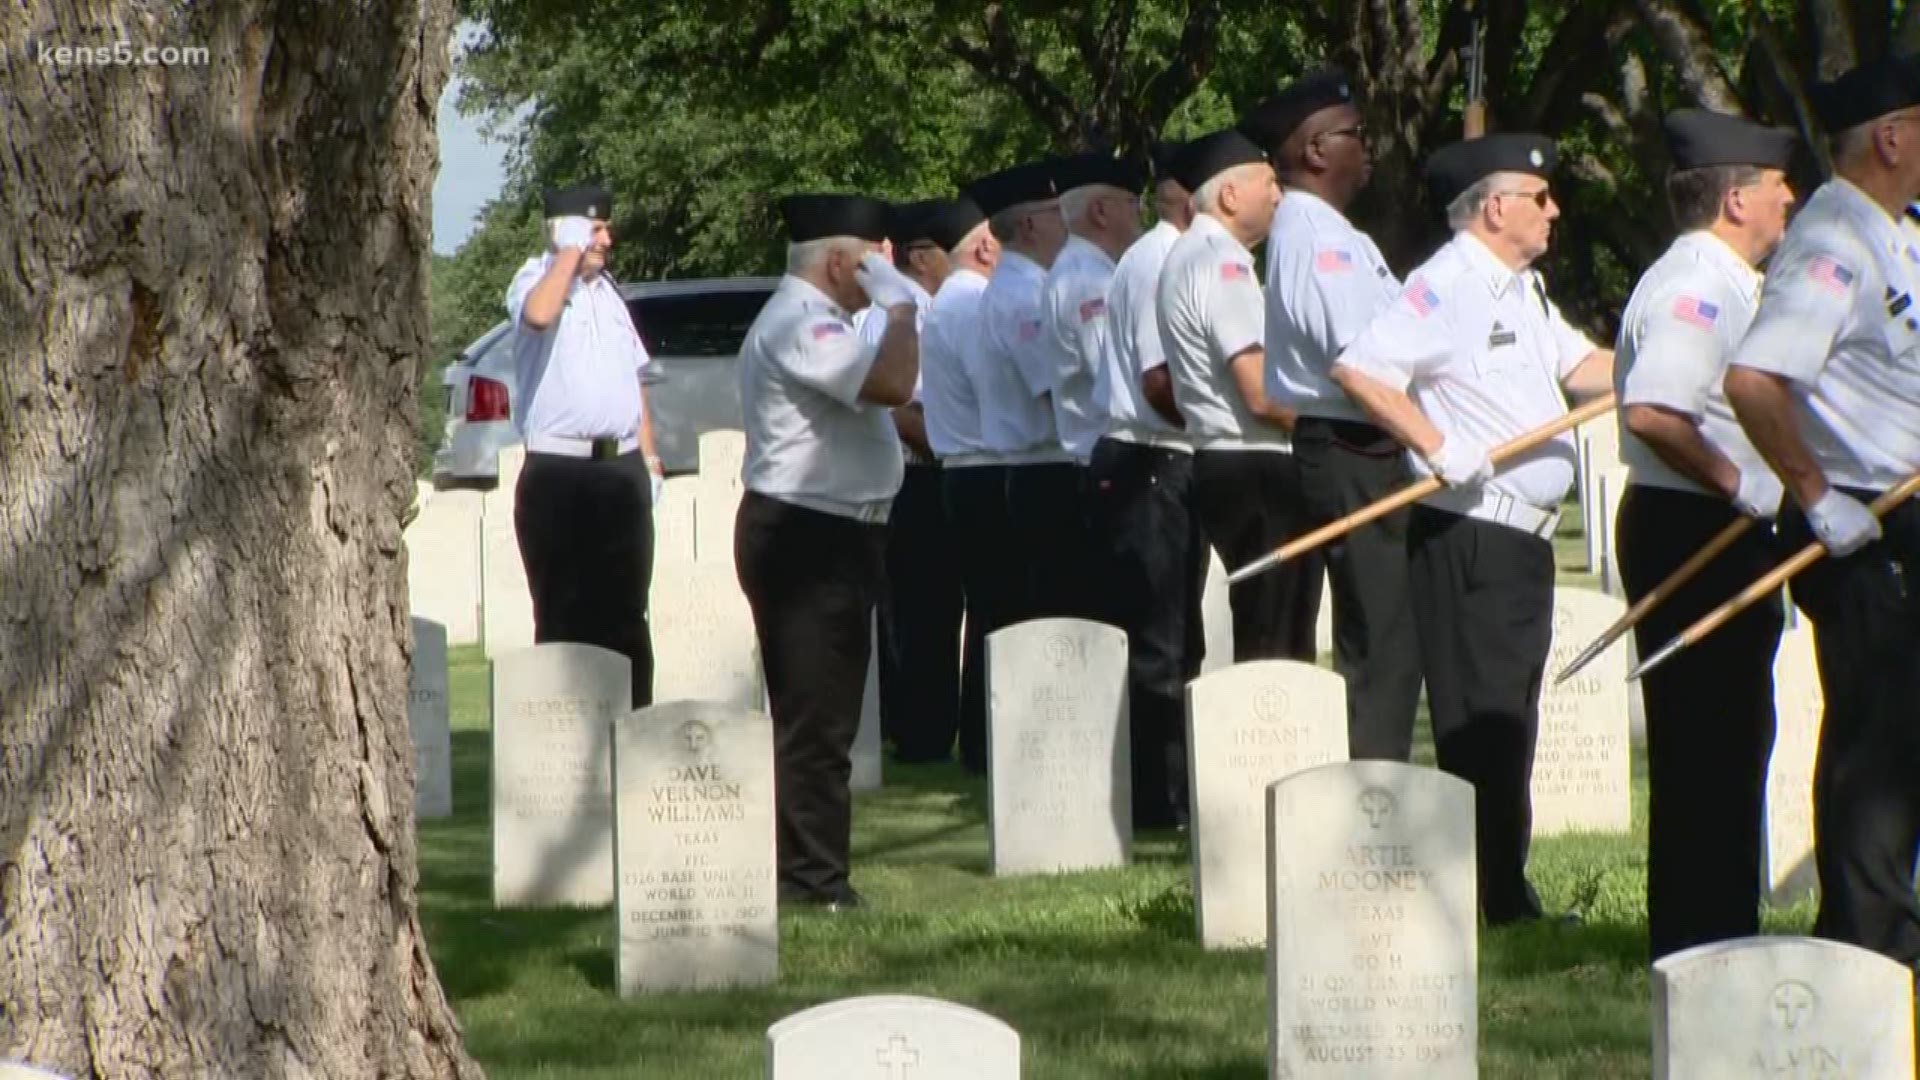 The Memorial Services Detachment is a volunteer organization that assists at military funeral ceremonies, giving families comfort in their time of need.